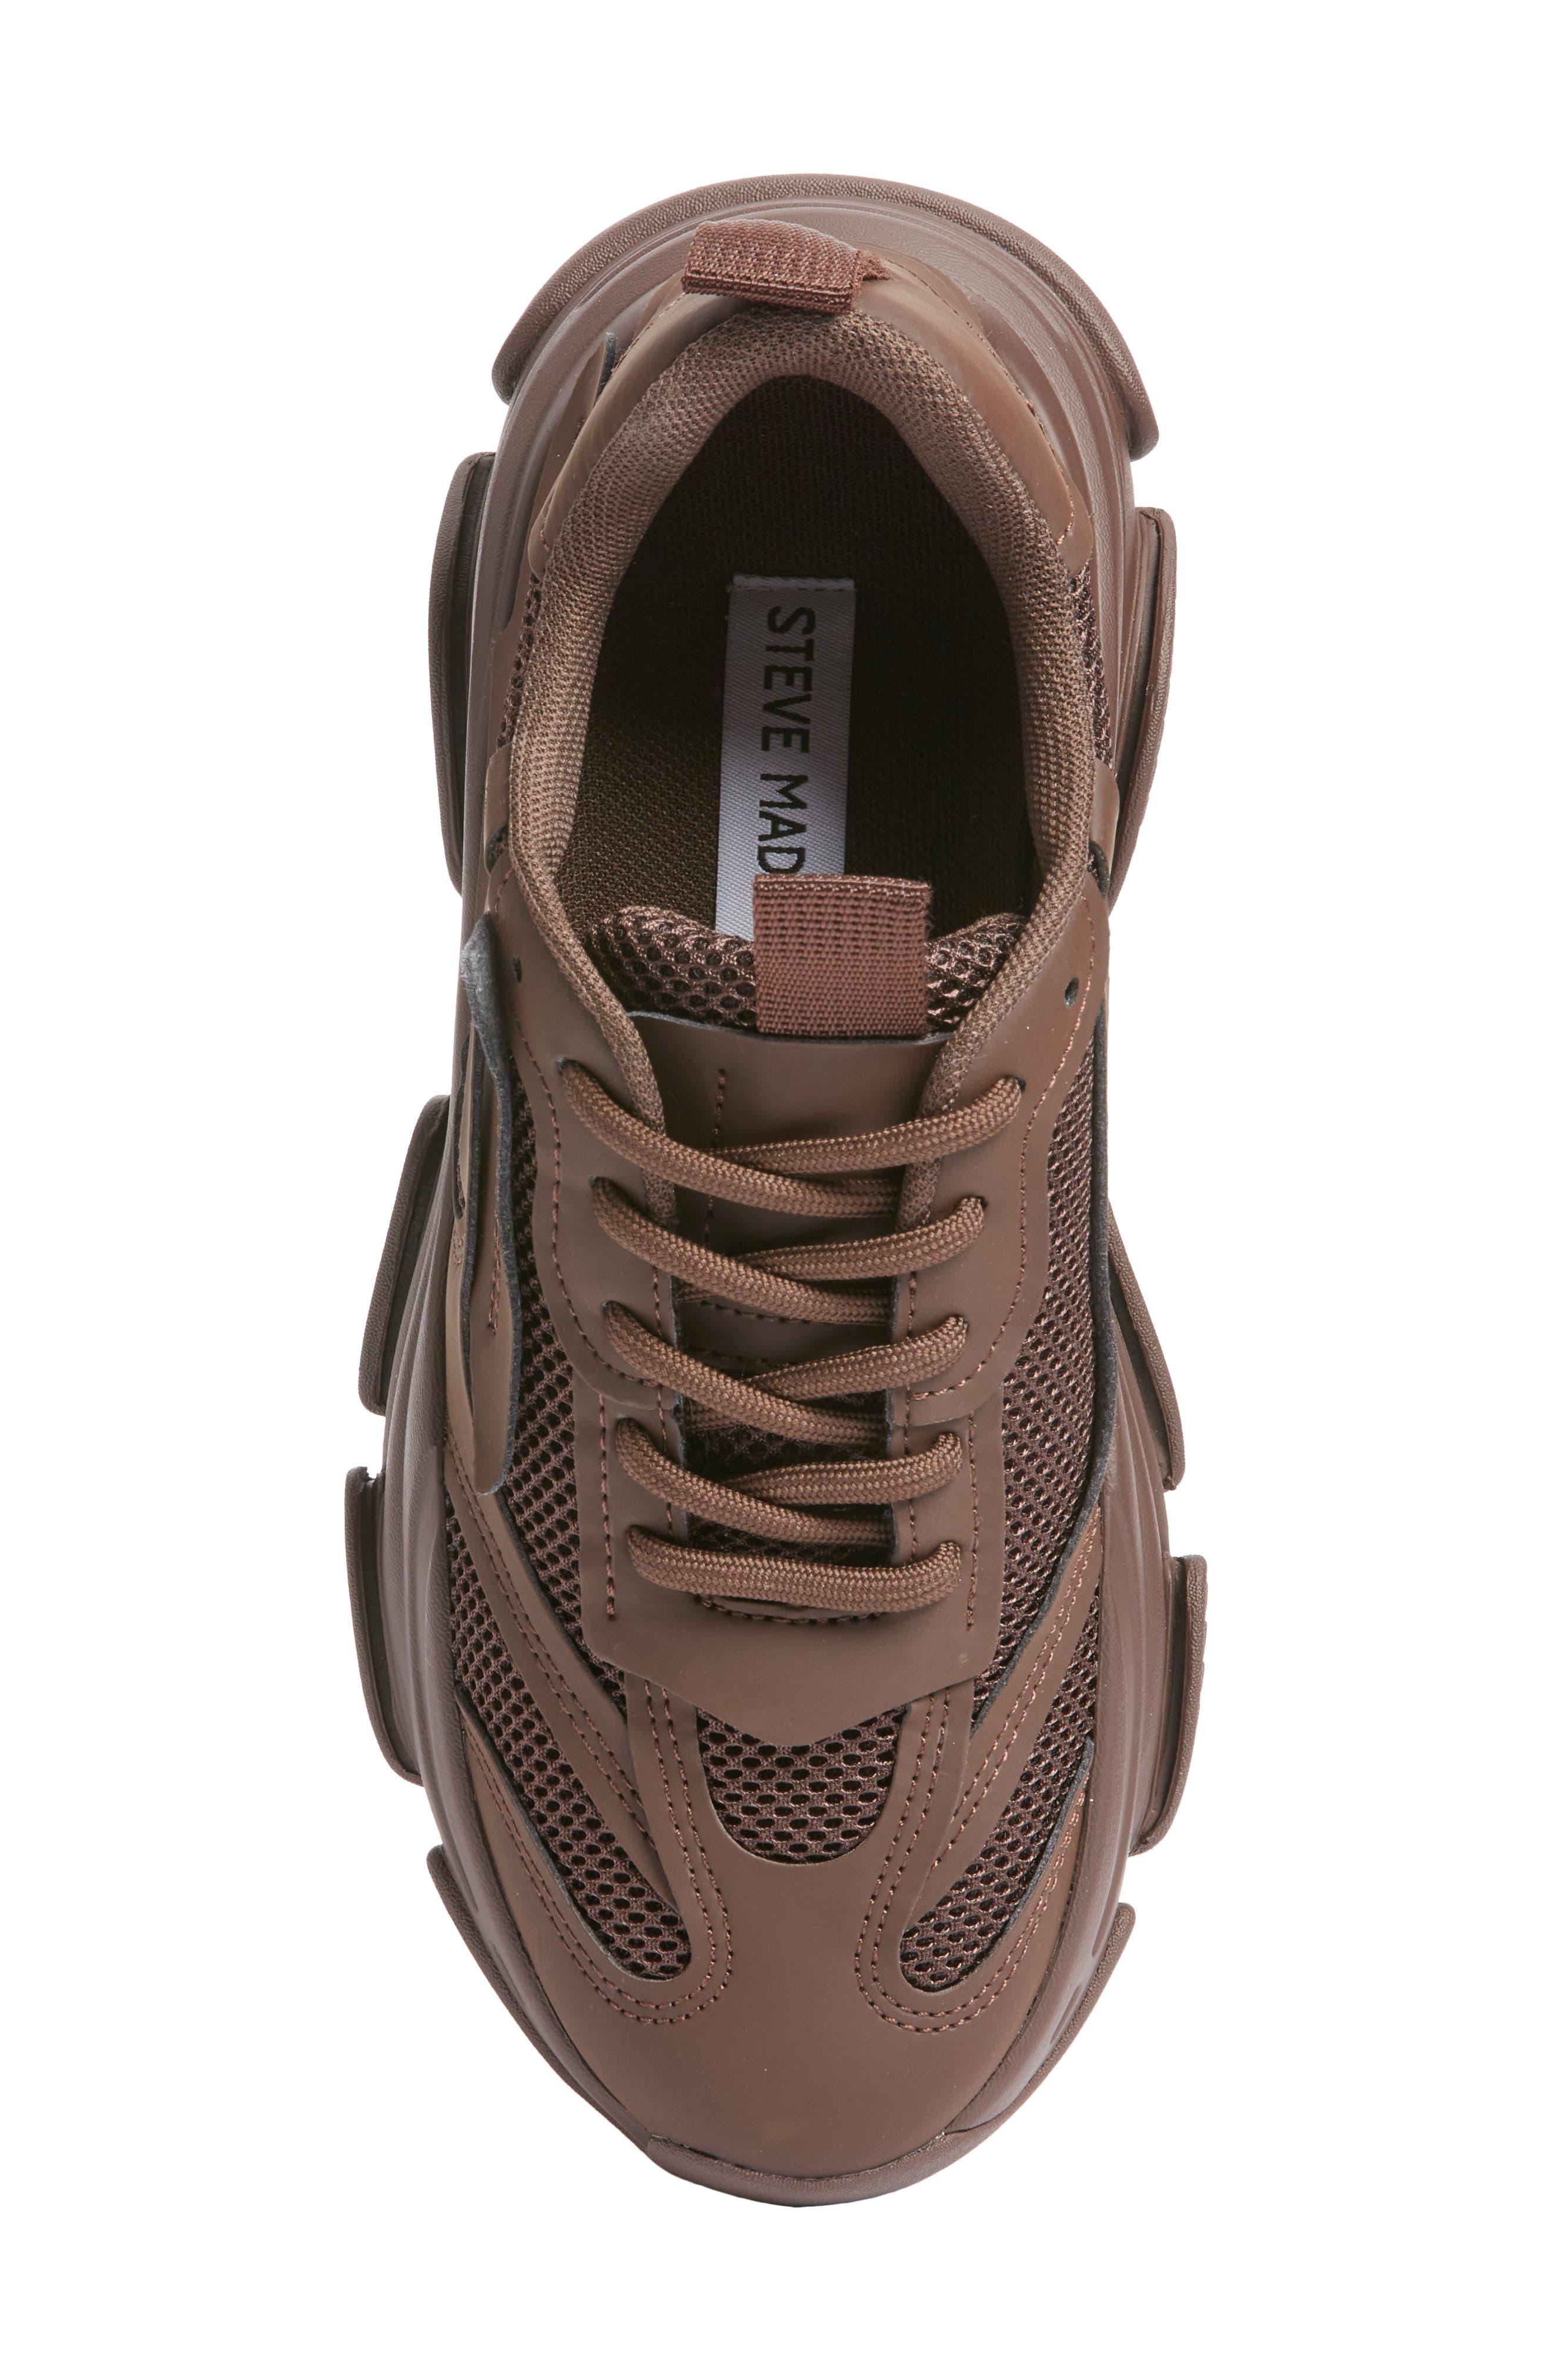 Steve Madden Shoe - Possession - Tan » New Products Every Day